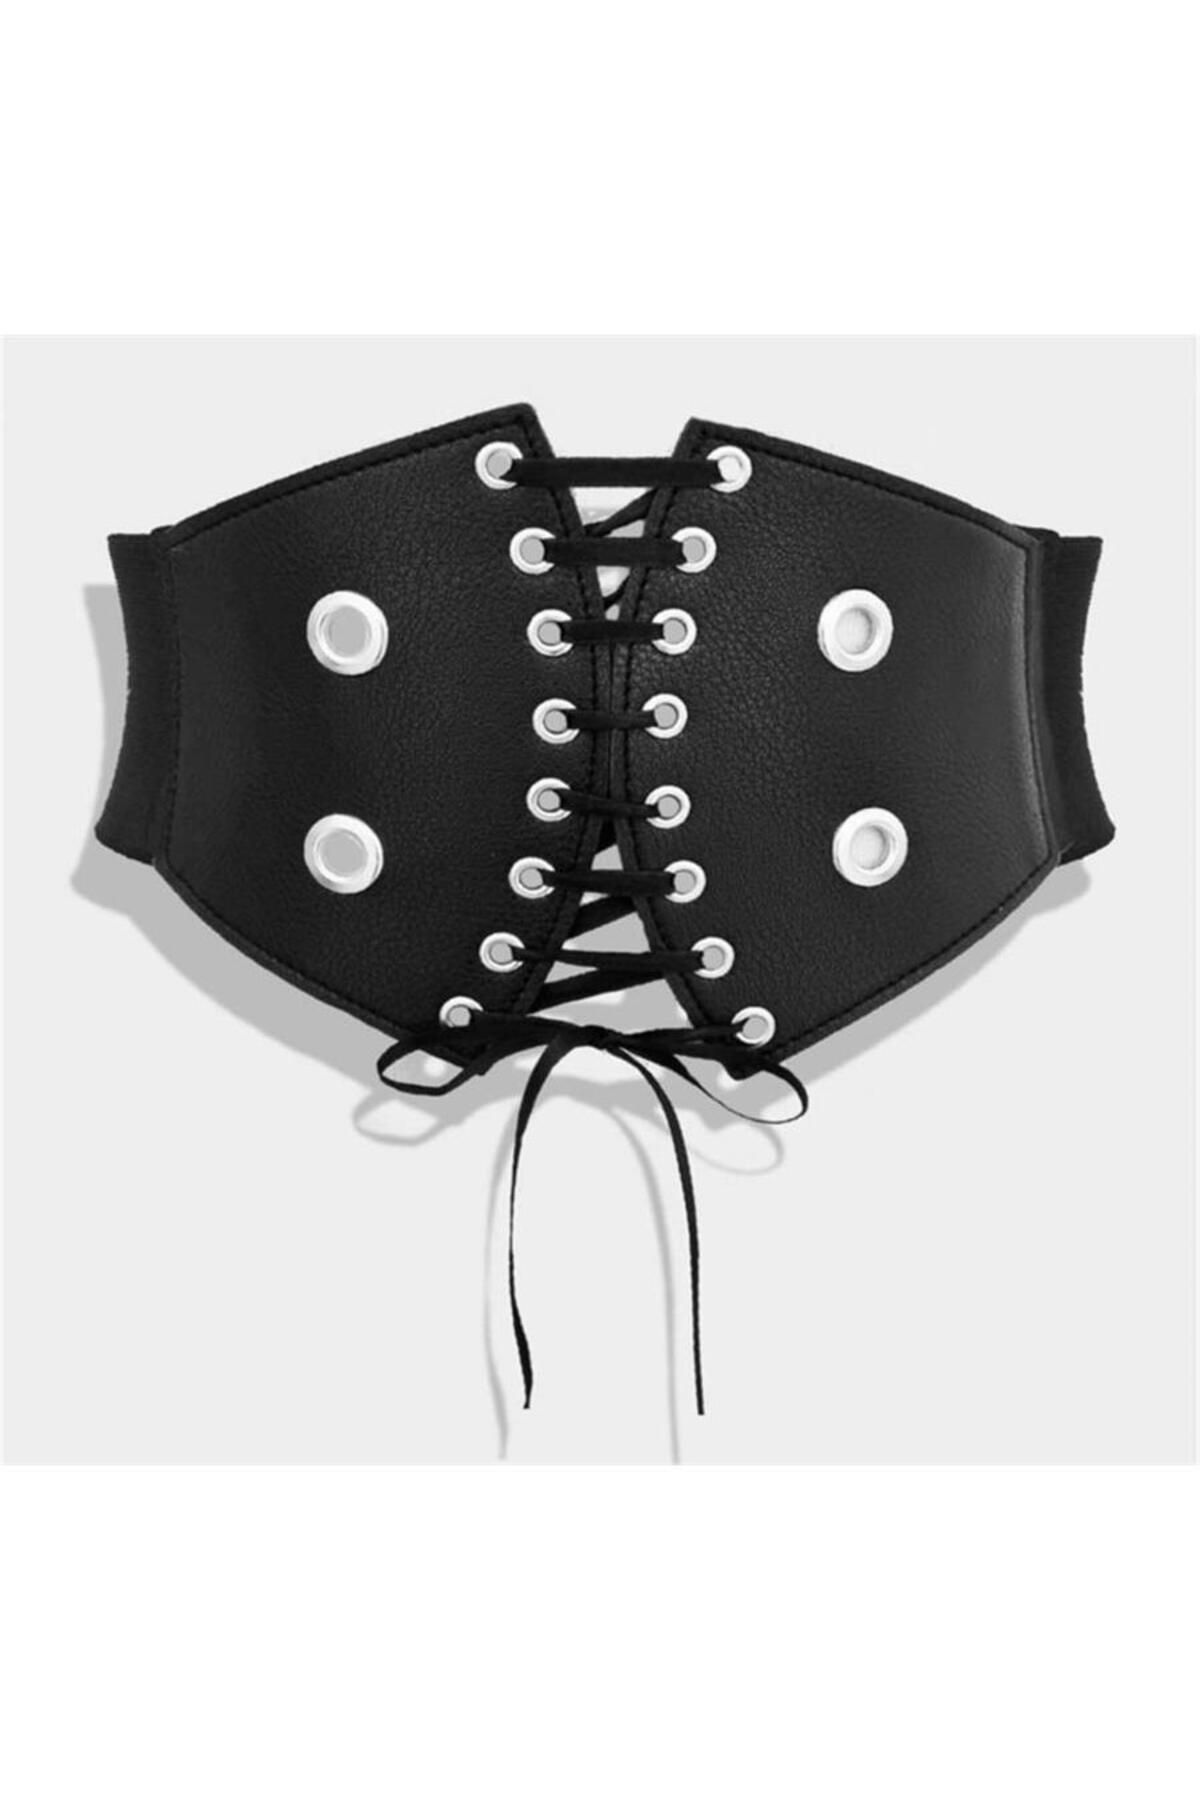 Black leather corset belt with studs